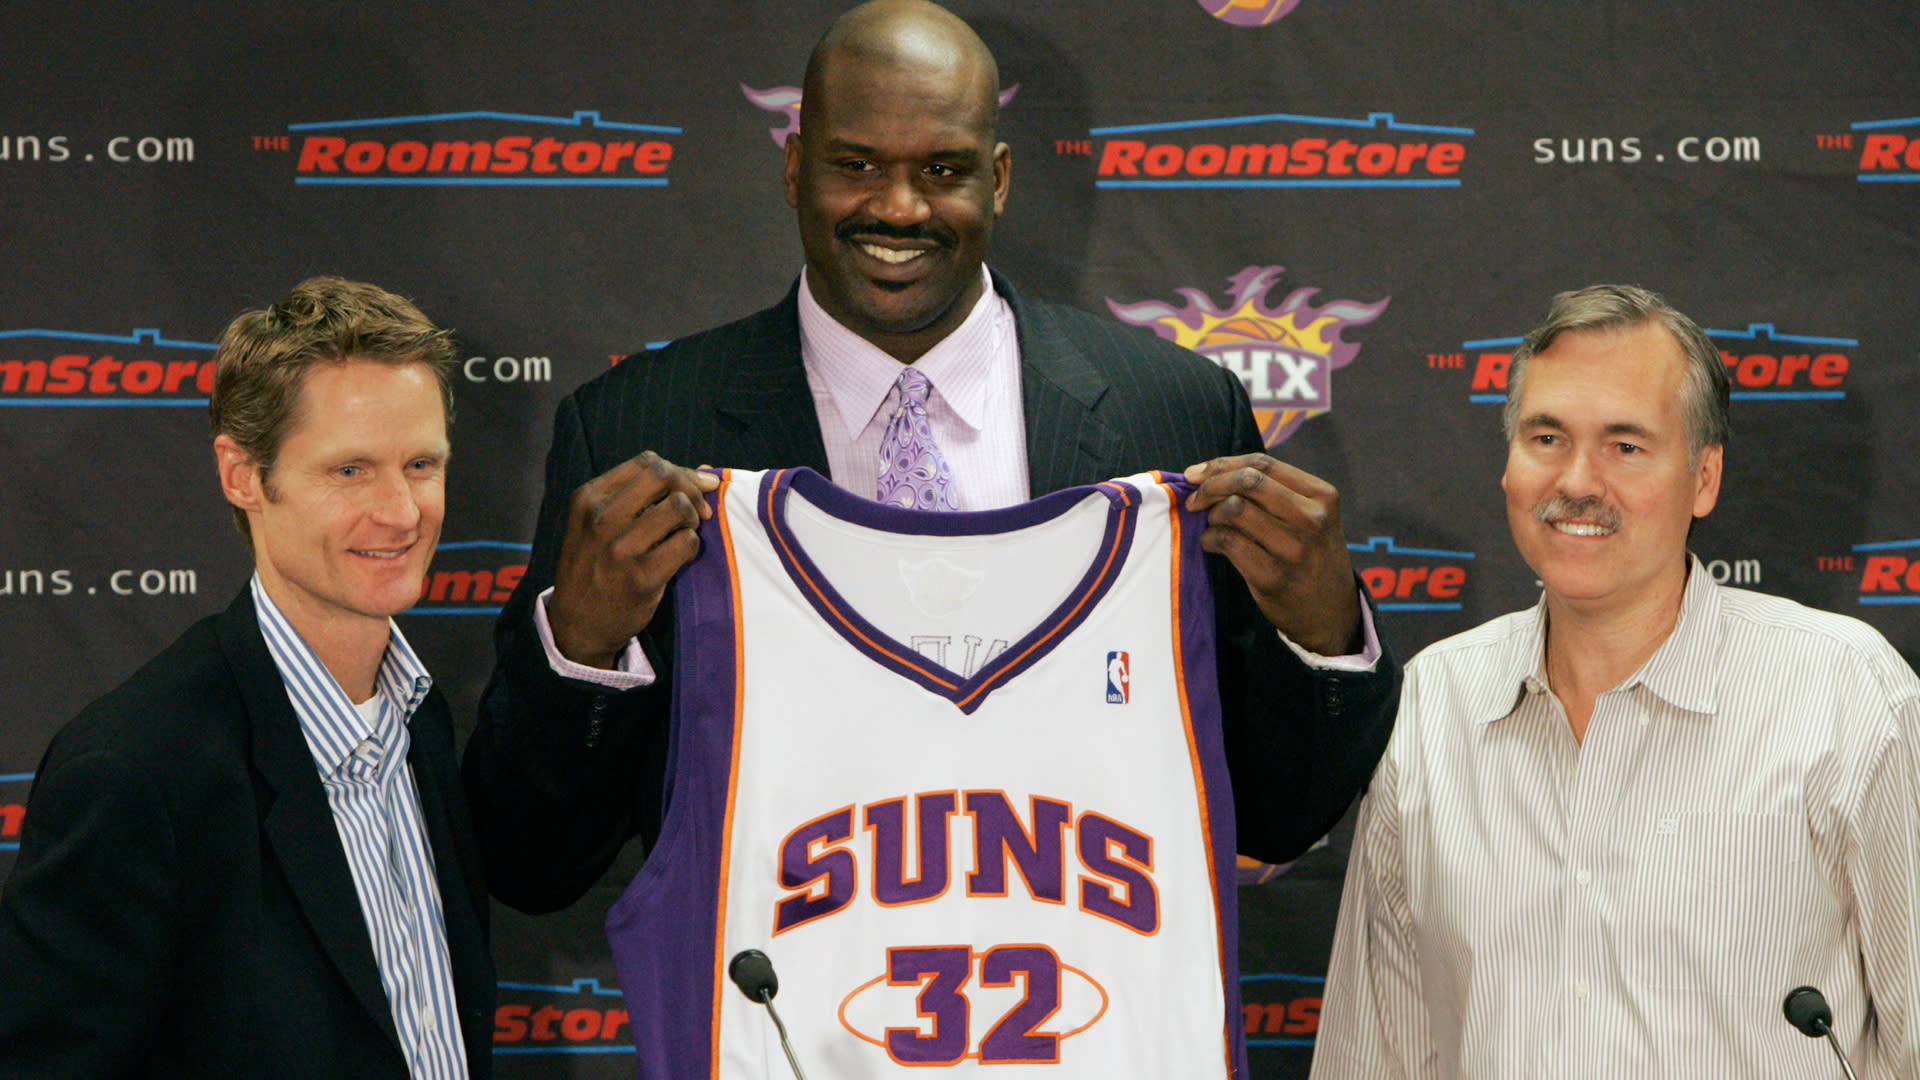 shaquille o neal suns jersey